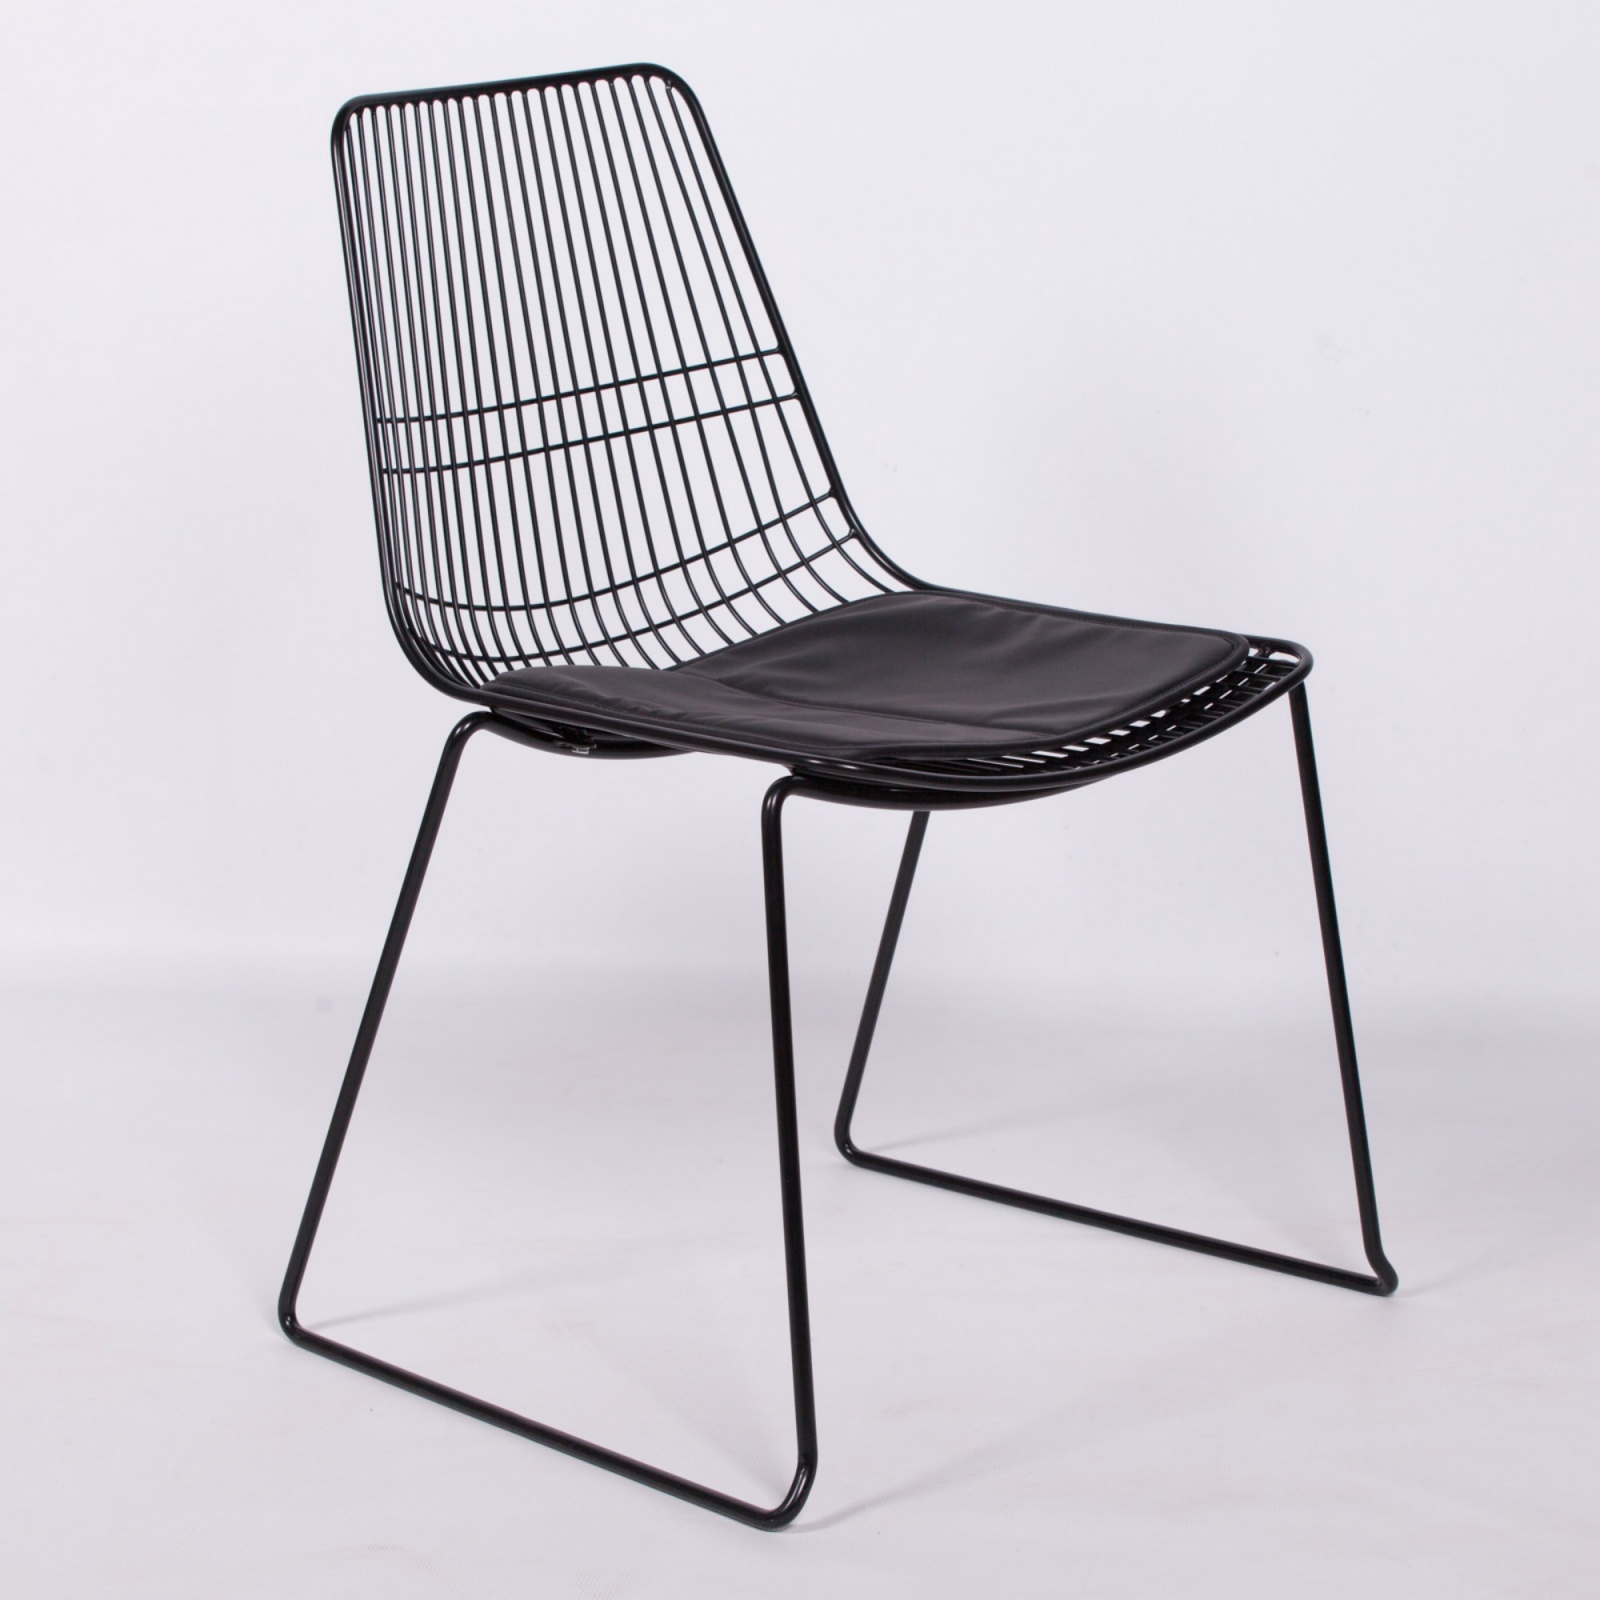 Wire Black Mesh Industrial Dining Chair Furniture - La Maison Chic ...